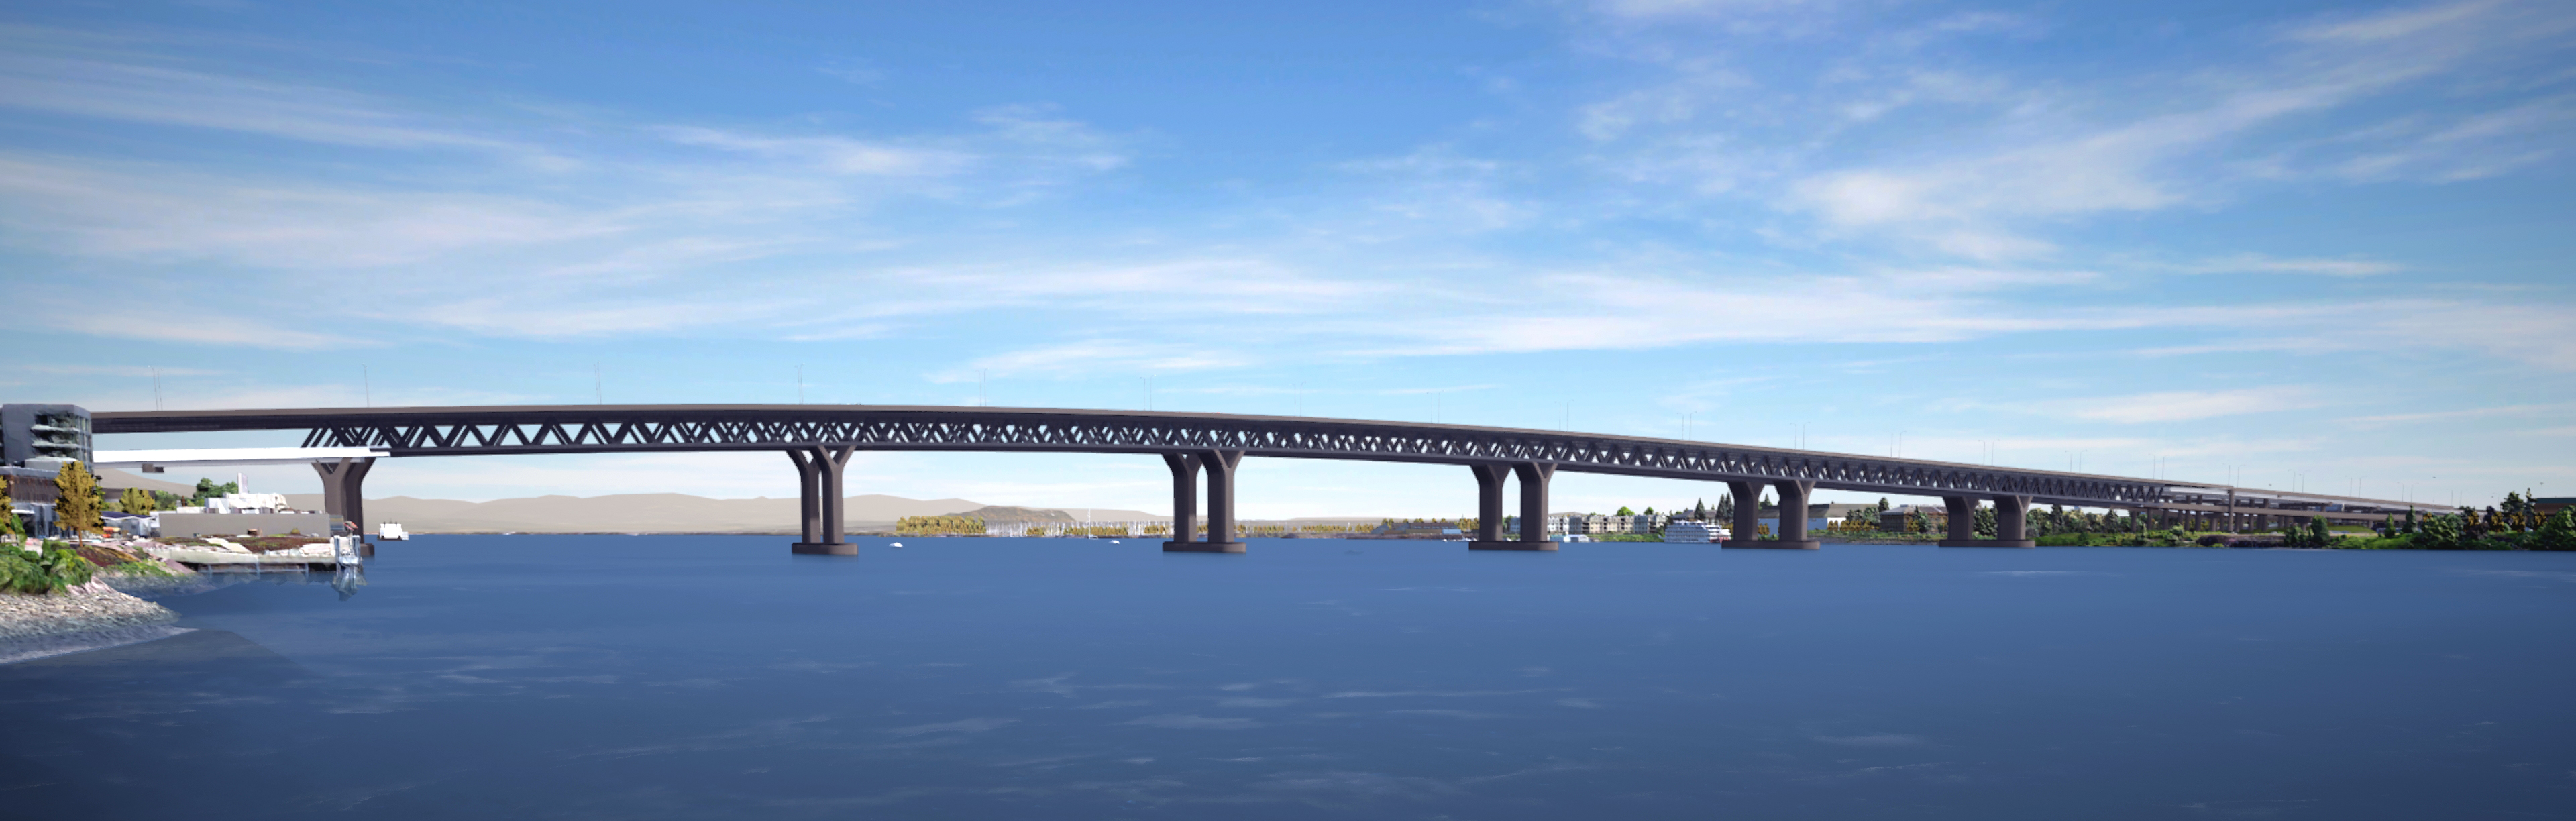 View of a double-level bridge design that spans the water